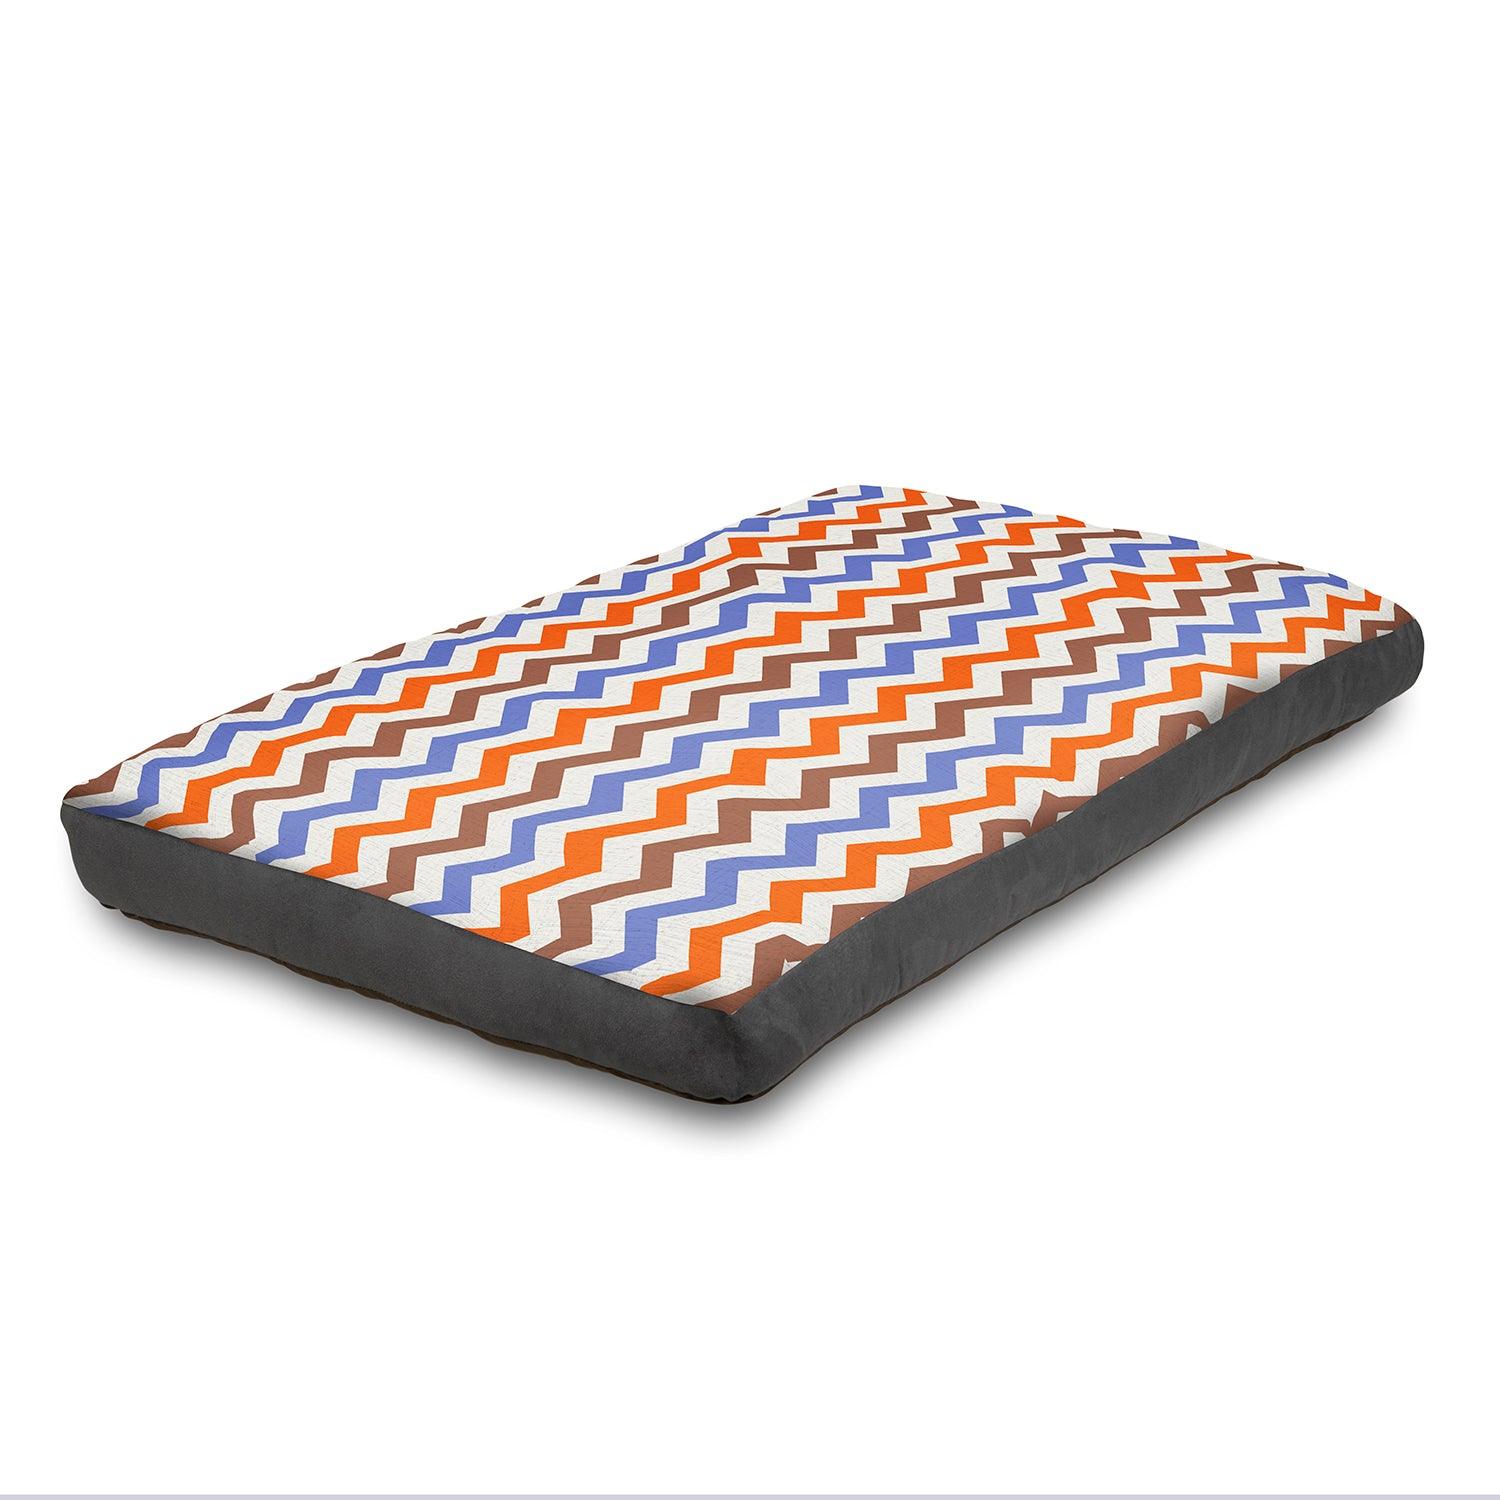 View Super Comfy Dog Bed Soft and Fluffy with Washable Cover Medium 100 cm x 65 cm Zigzag information